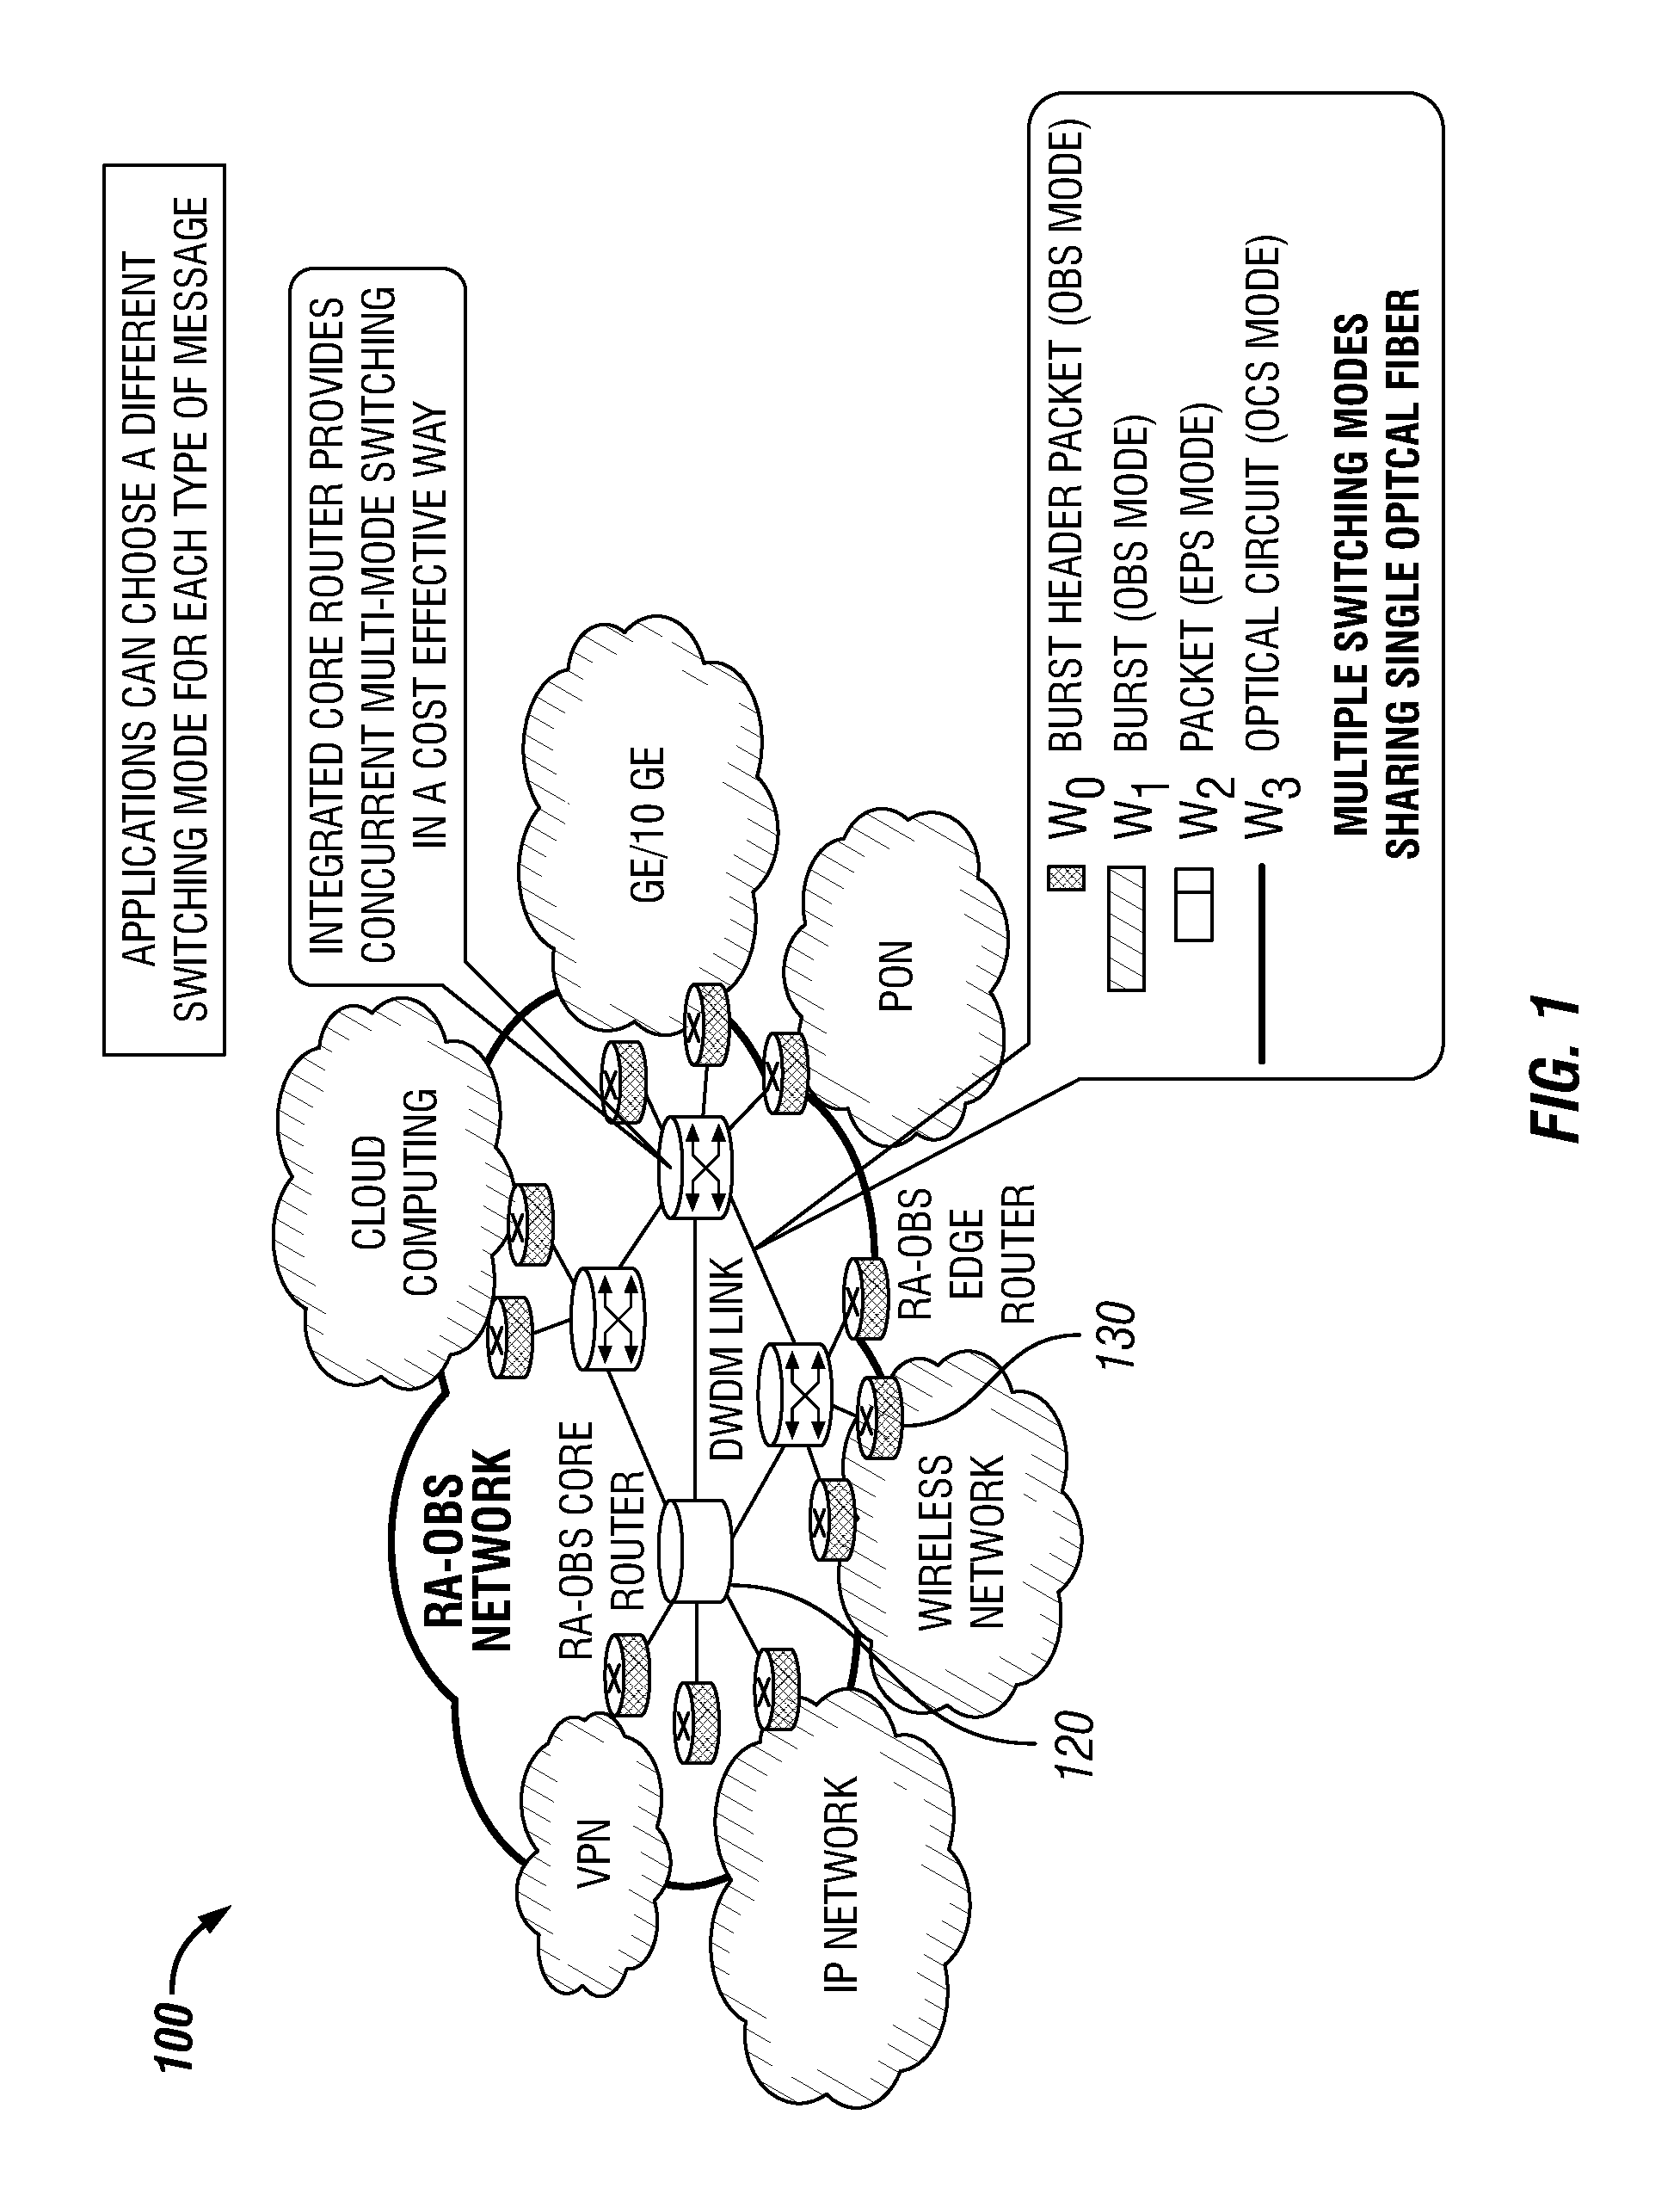 Dense Wavelength Division Multiplexing Multi-Mode Switching Systems and Methods for Concurrent and Dynamic Reconfiguration with Different Switching Modes